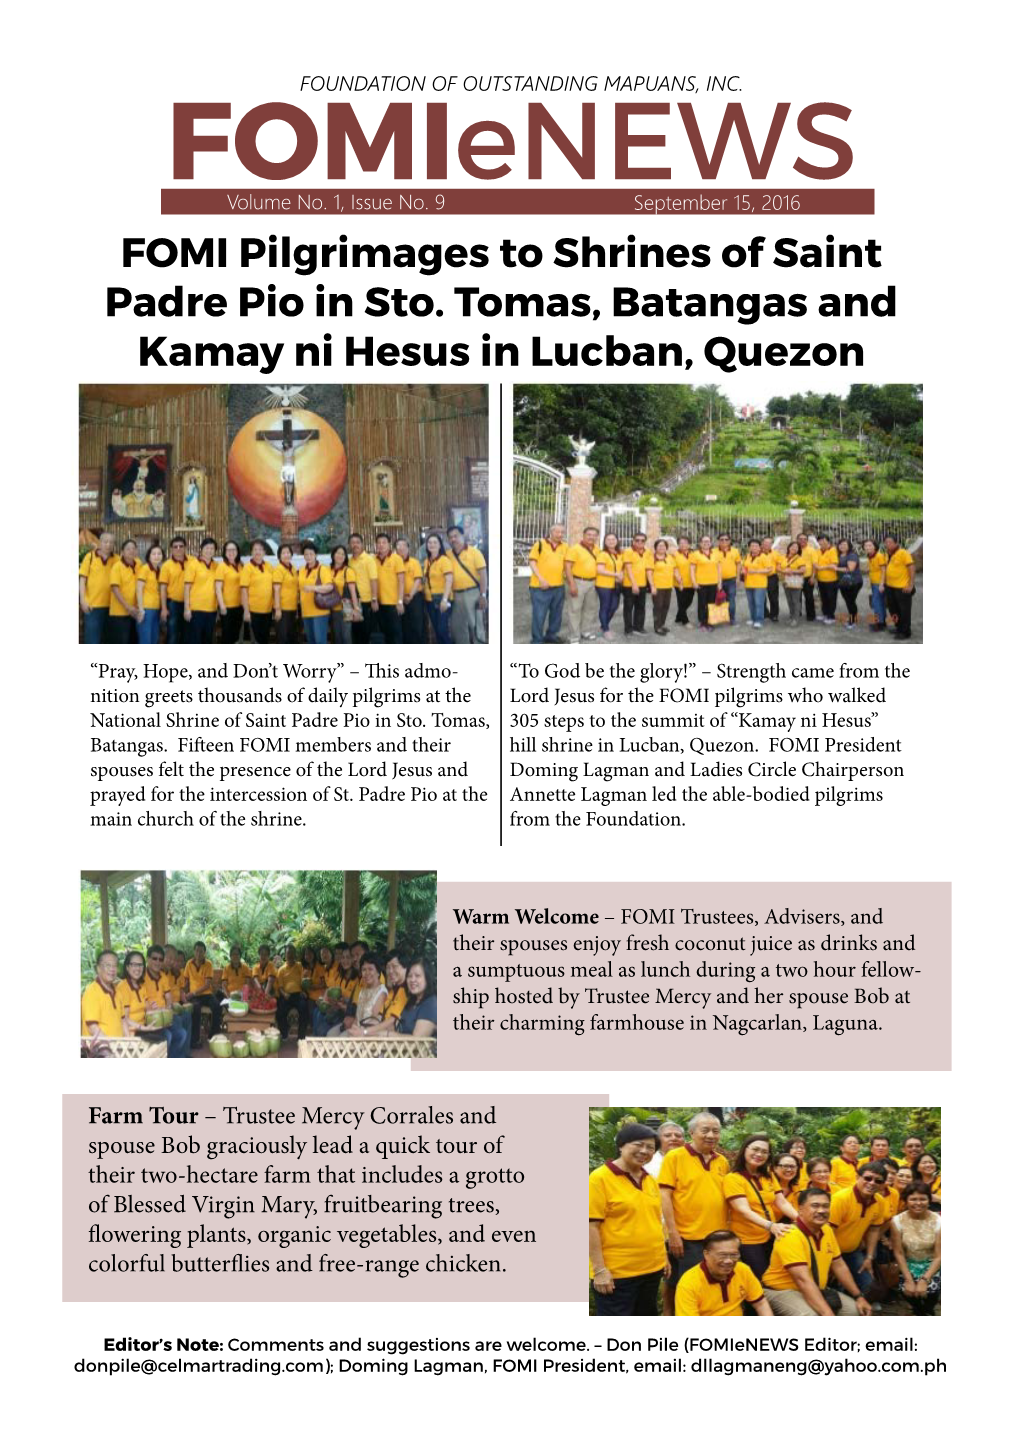 FOMI Pilgrimages to Shrines of Saint Padre Pio in Sto. Tomas, Batangas and Kamay Ni Hesus in Lucban, Quezon